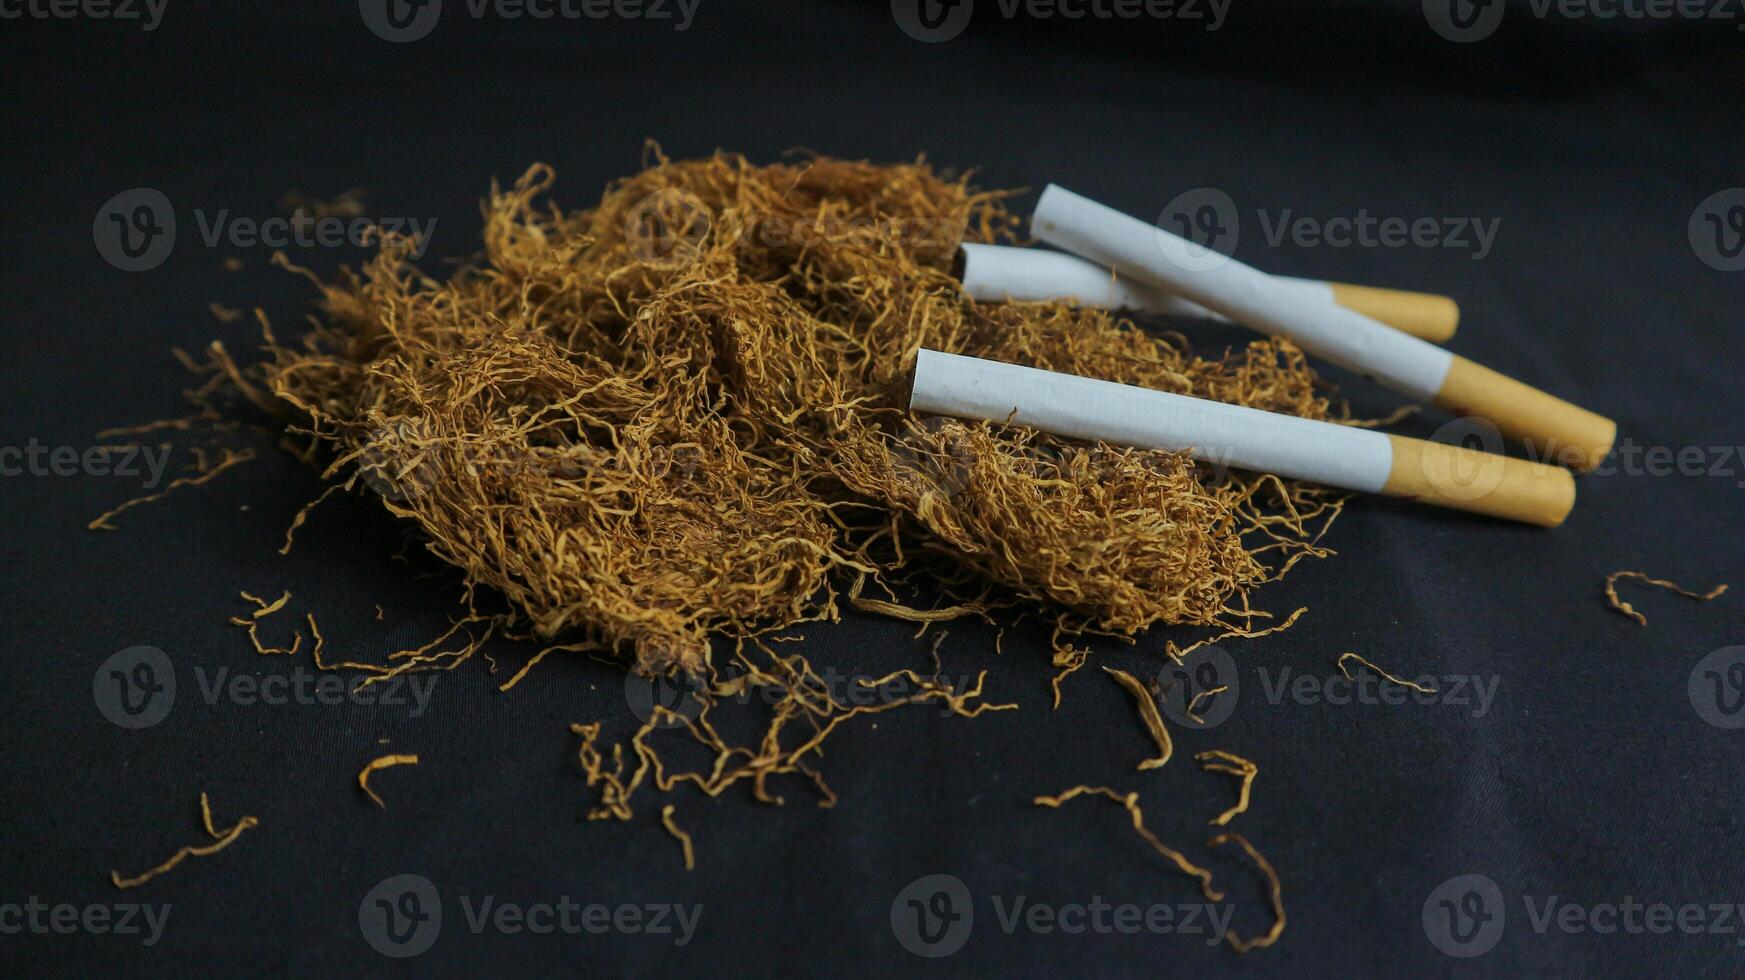 cut tobacco leaves and handmade cigarettes on black background photo